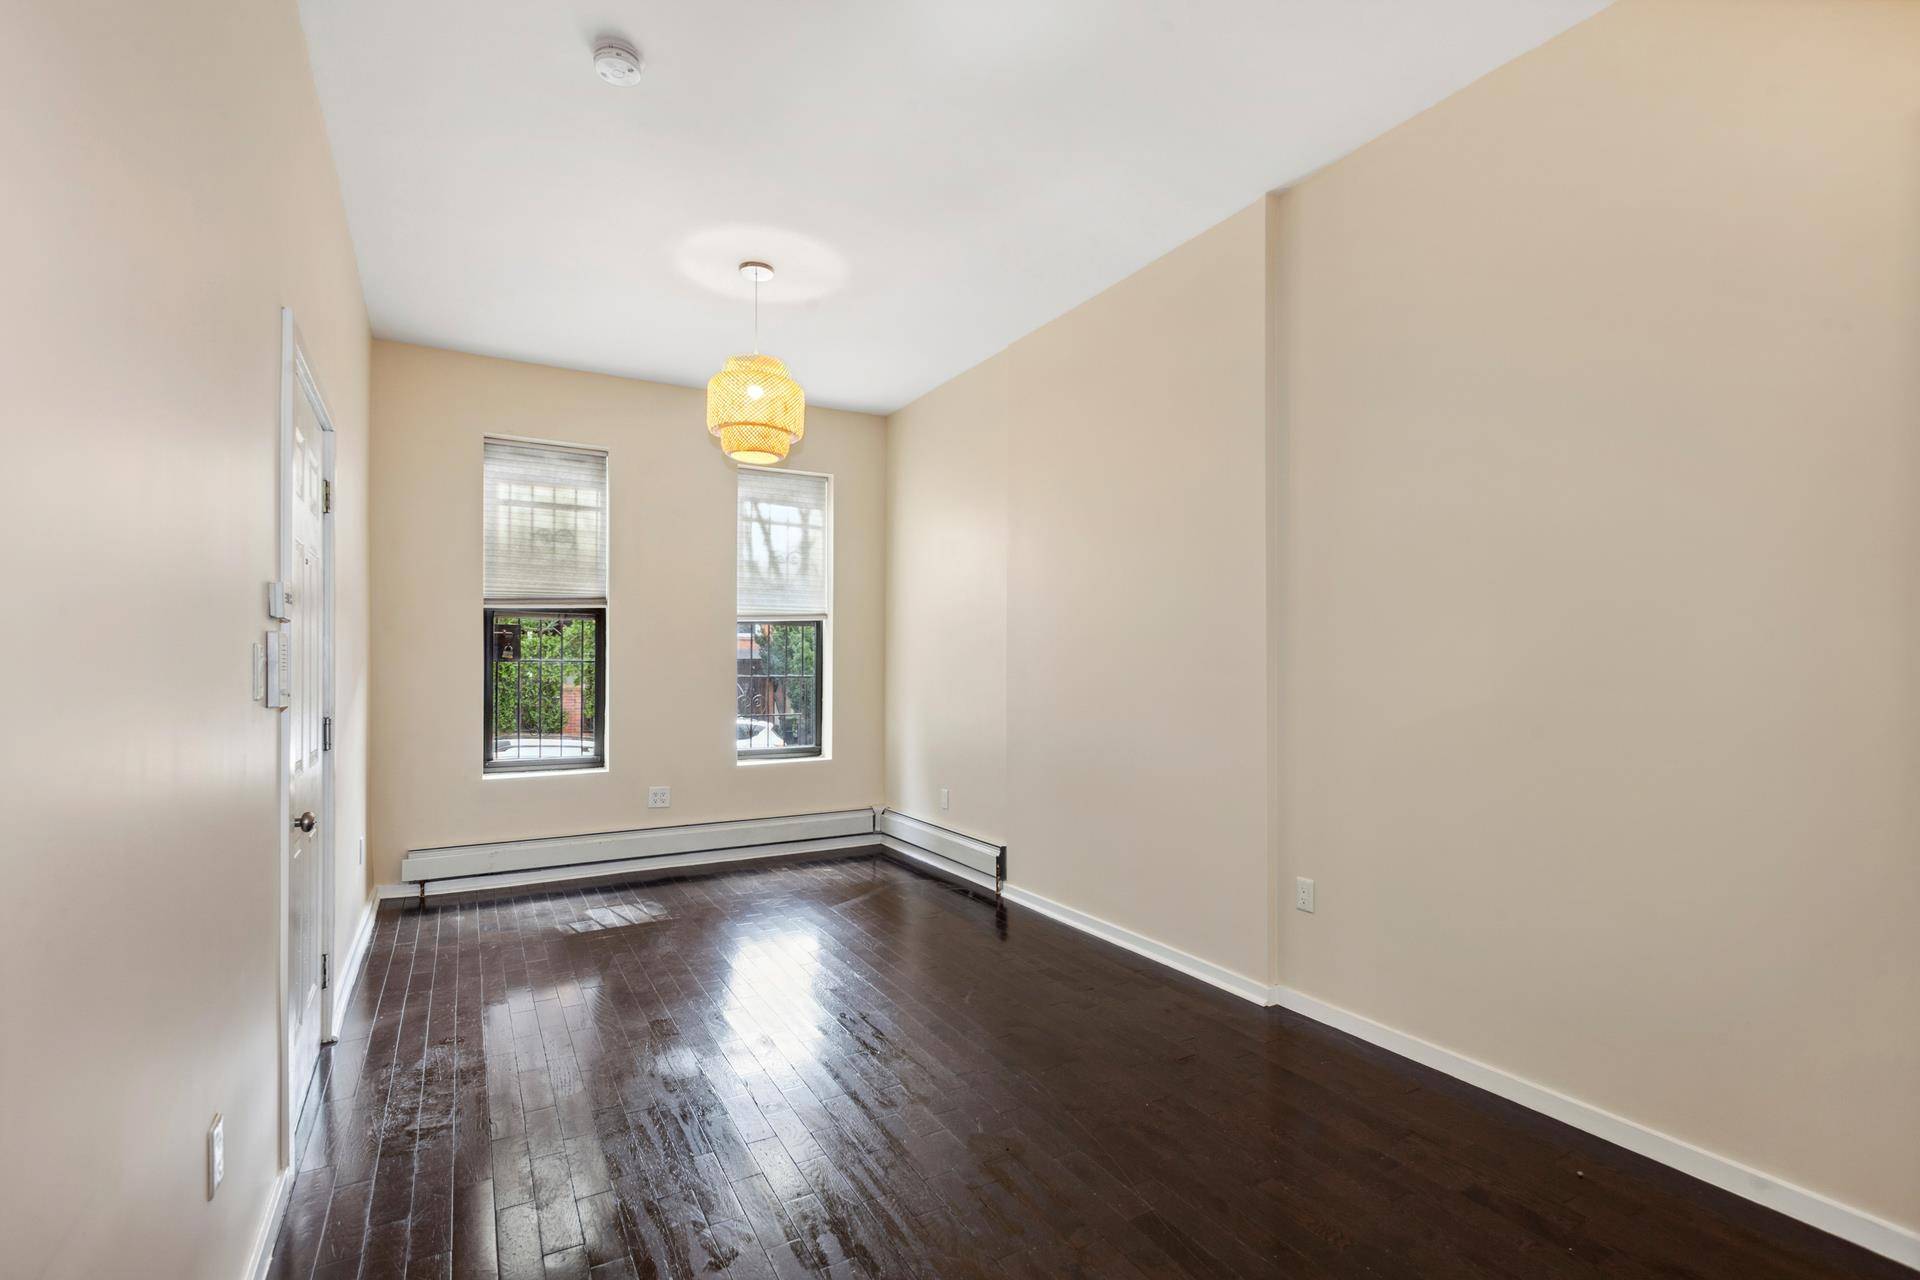 PRIME LOCATION ! ! Located in Parkslope on 16th Street amp ; 5th Avenue, you will find this 2 bedroom Garden duplex.